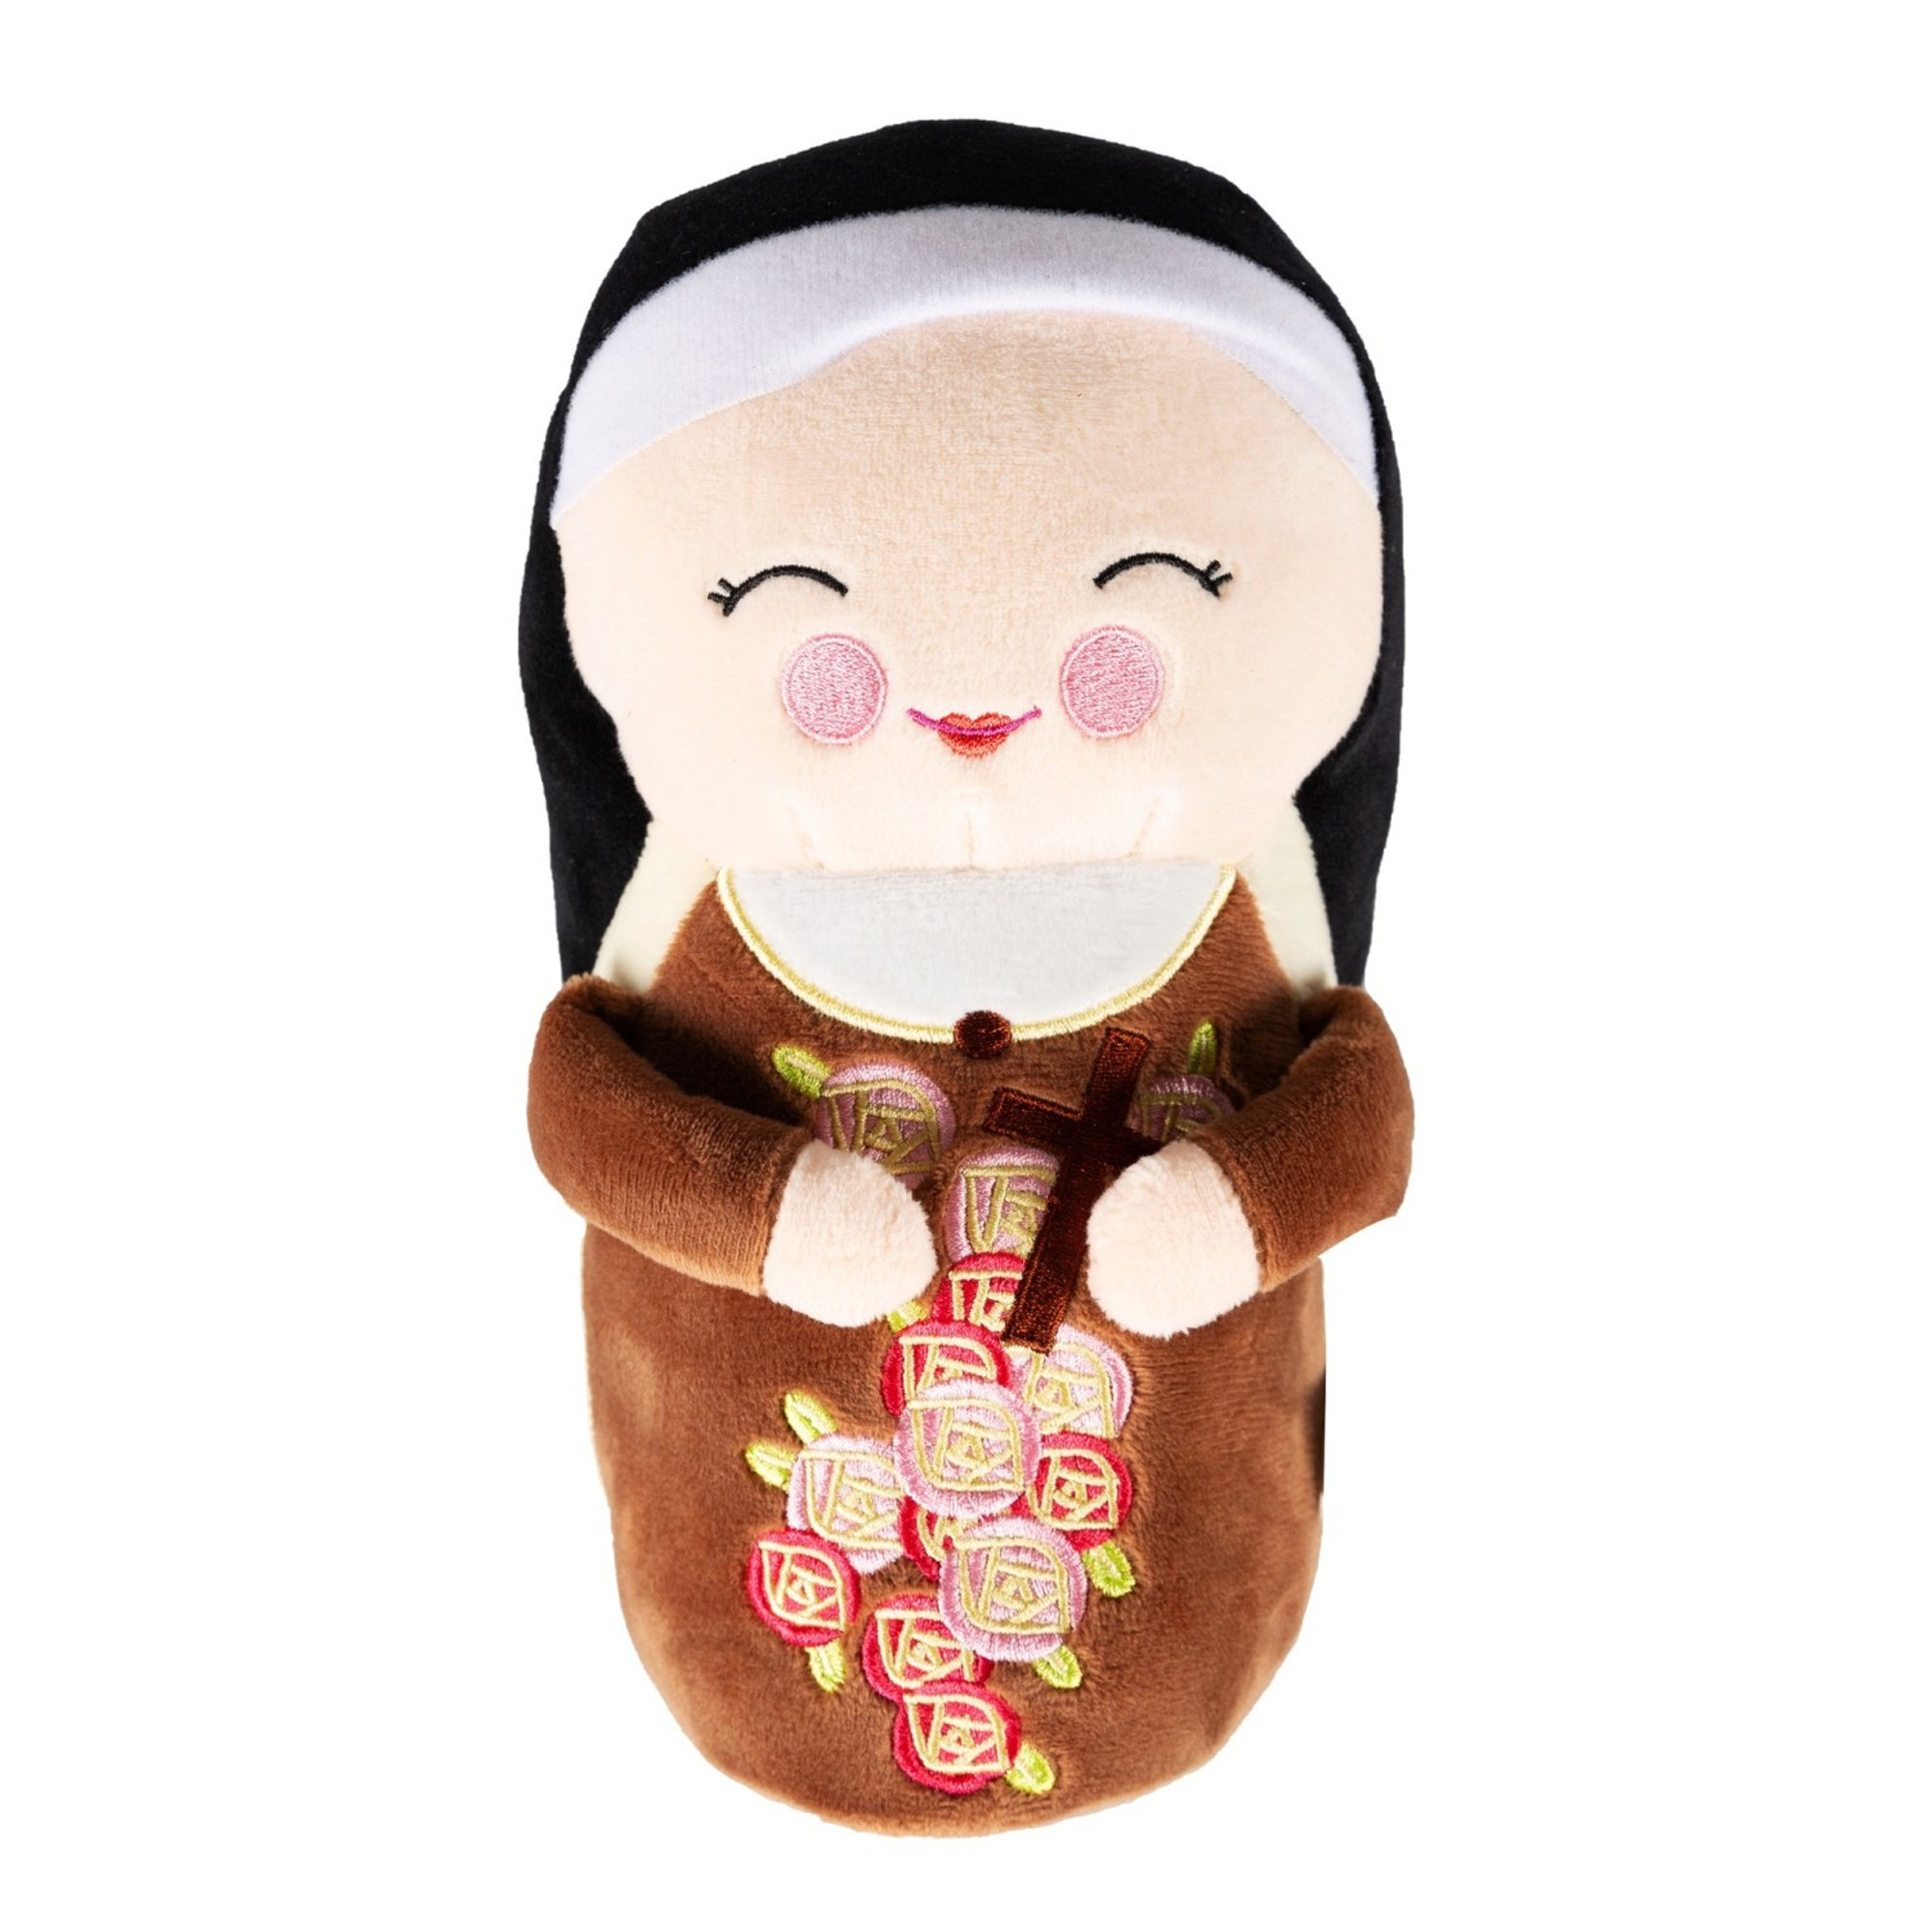 St. Therese Plush Doll - 10